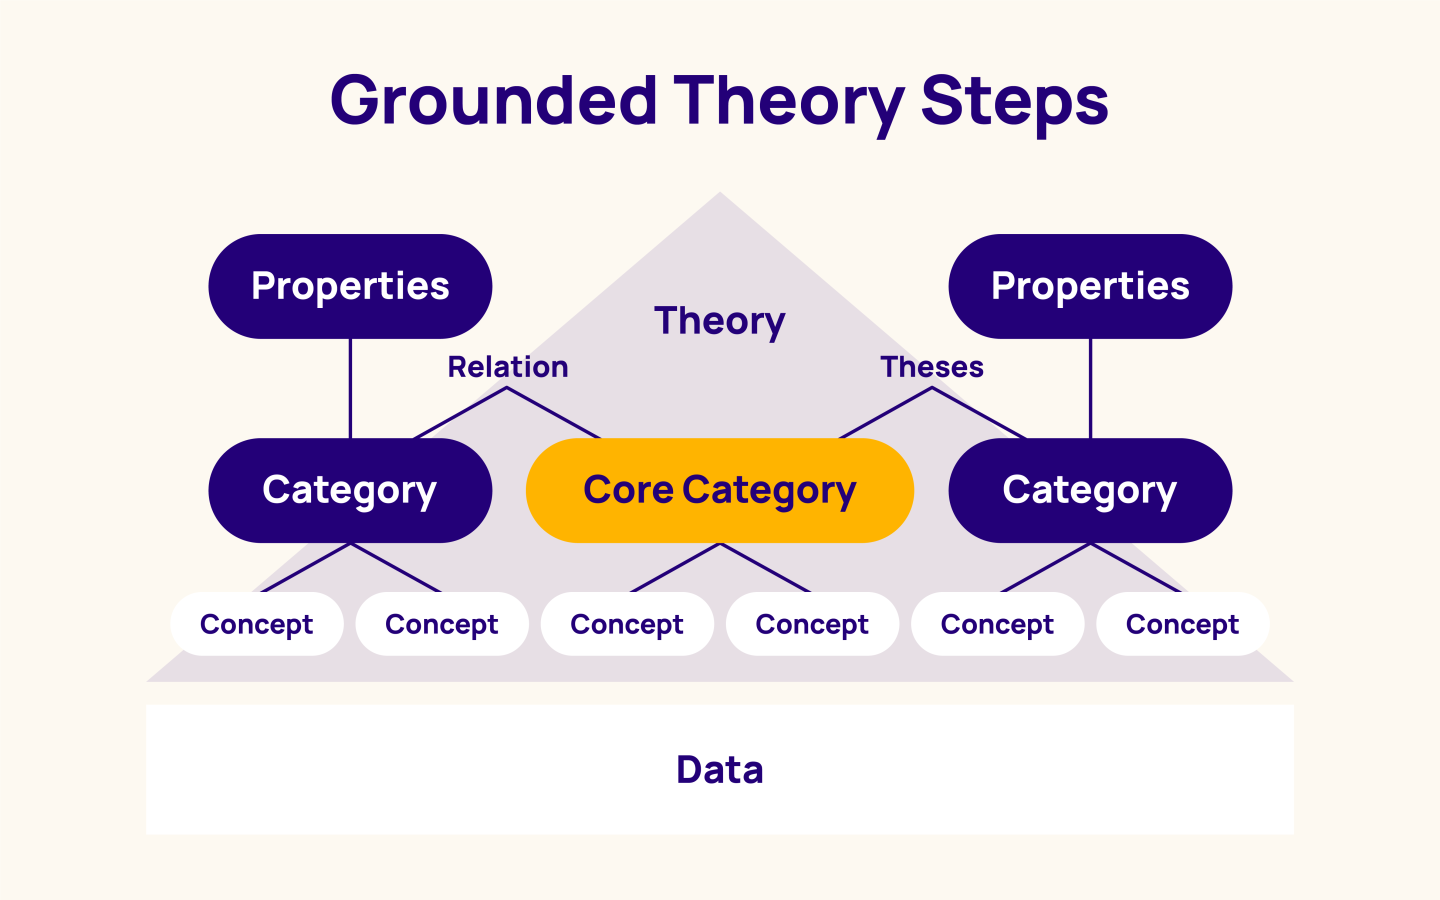 Coding and thematic analysis are key methods in a grounded theory approach. 